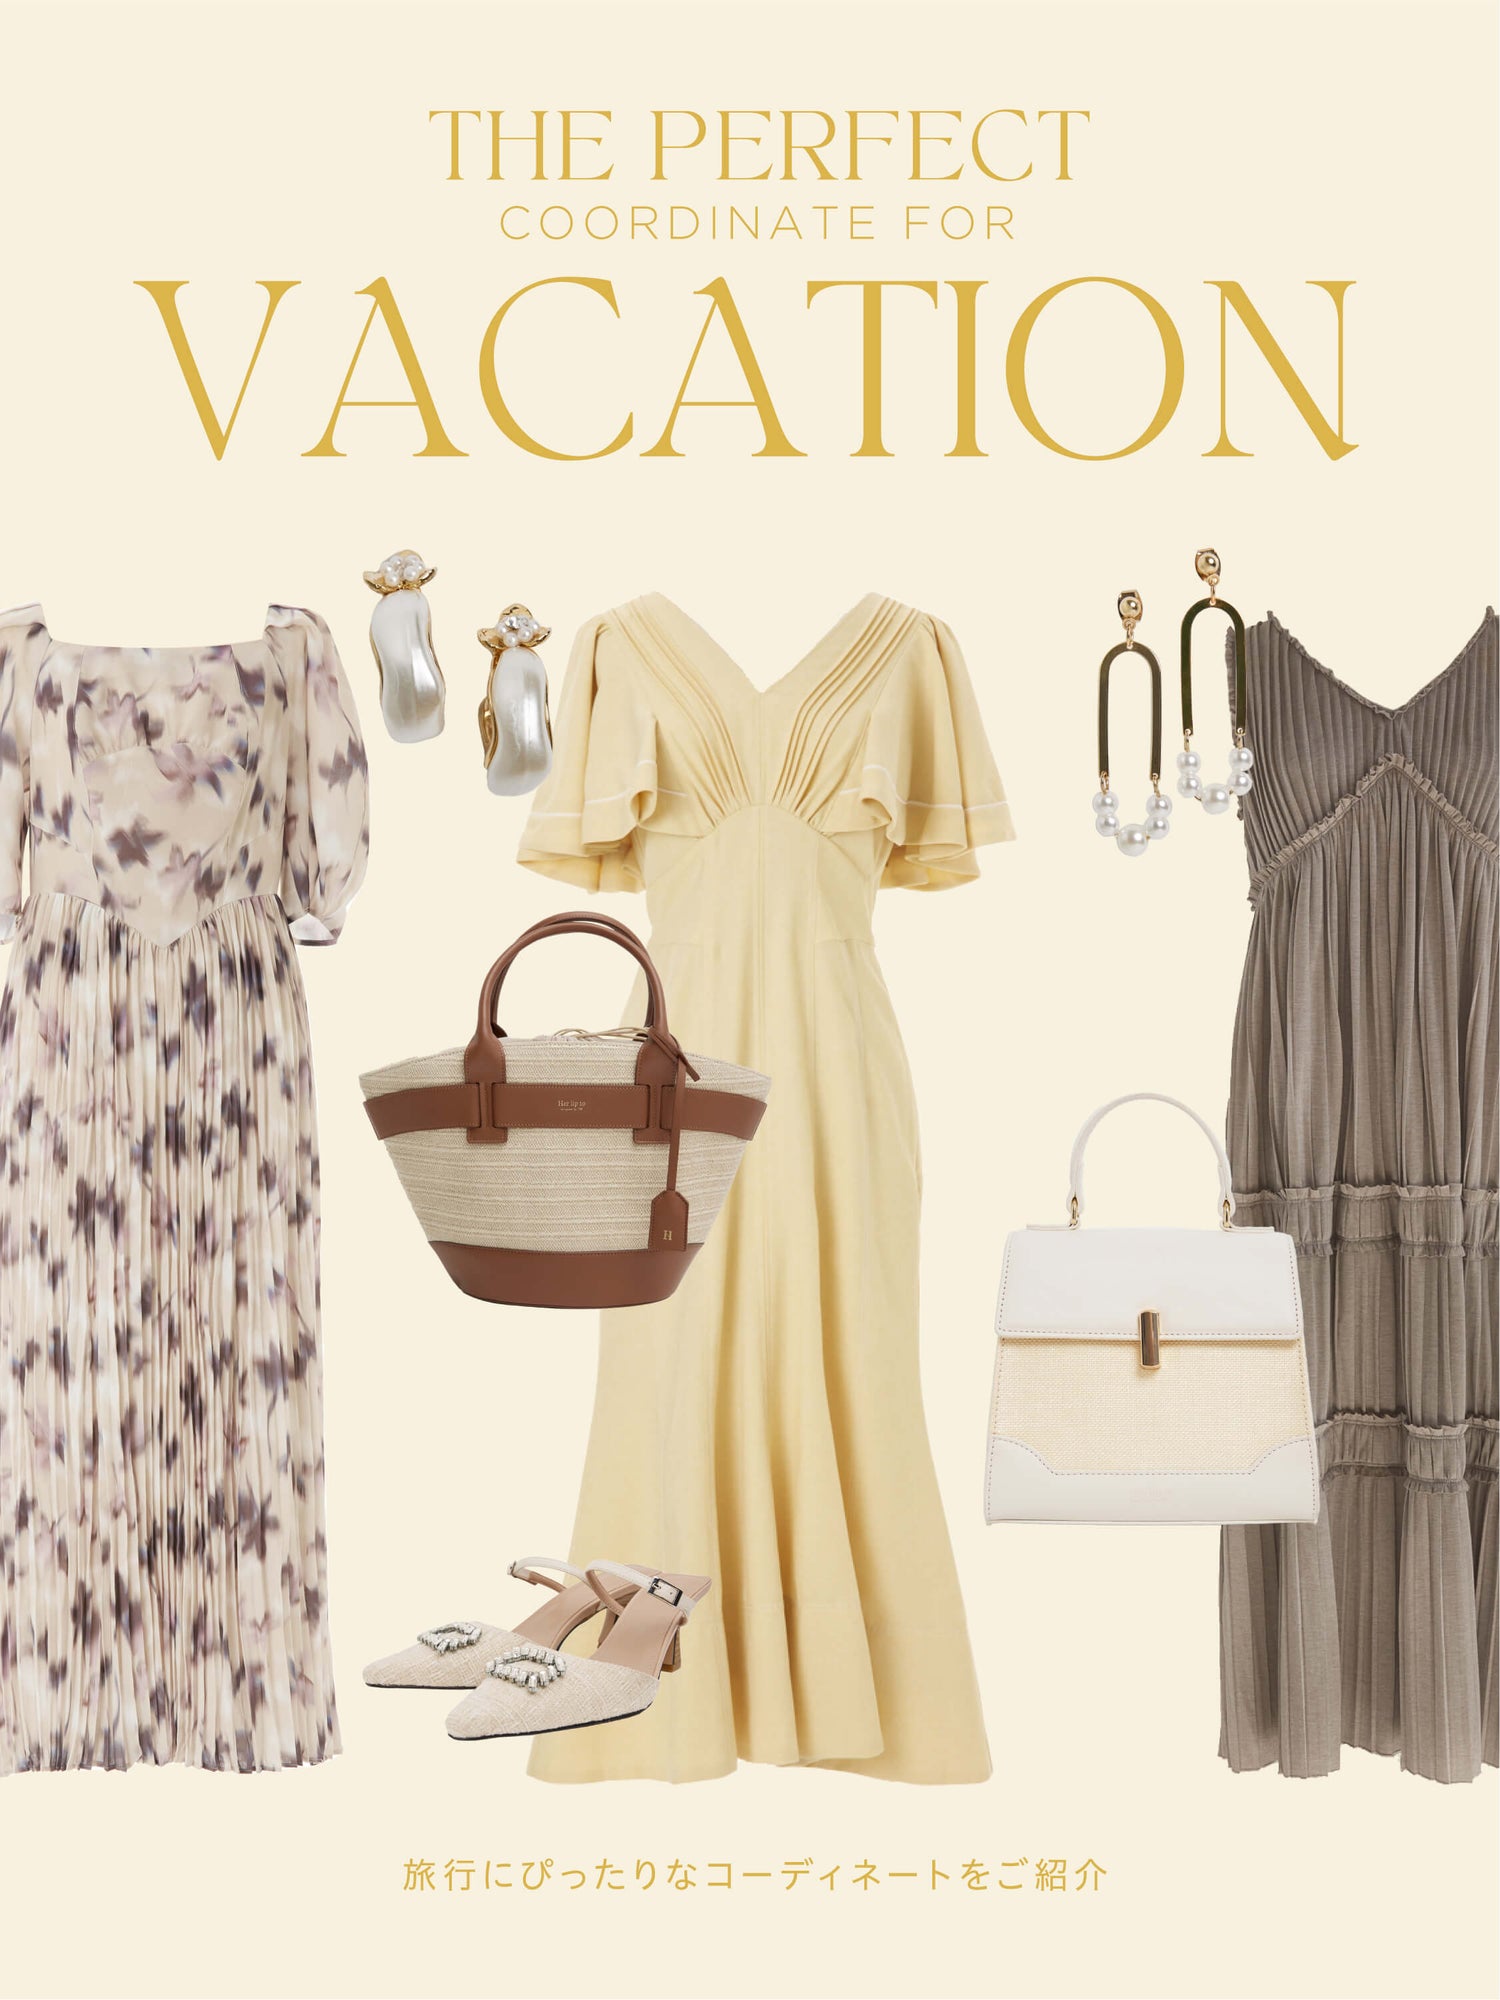 The Perfect Coordinate for Vacation